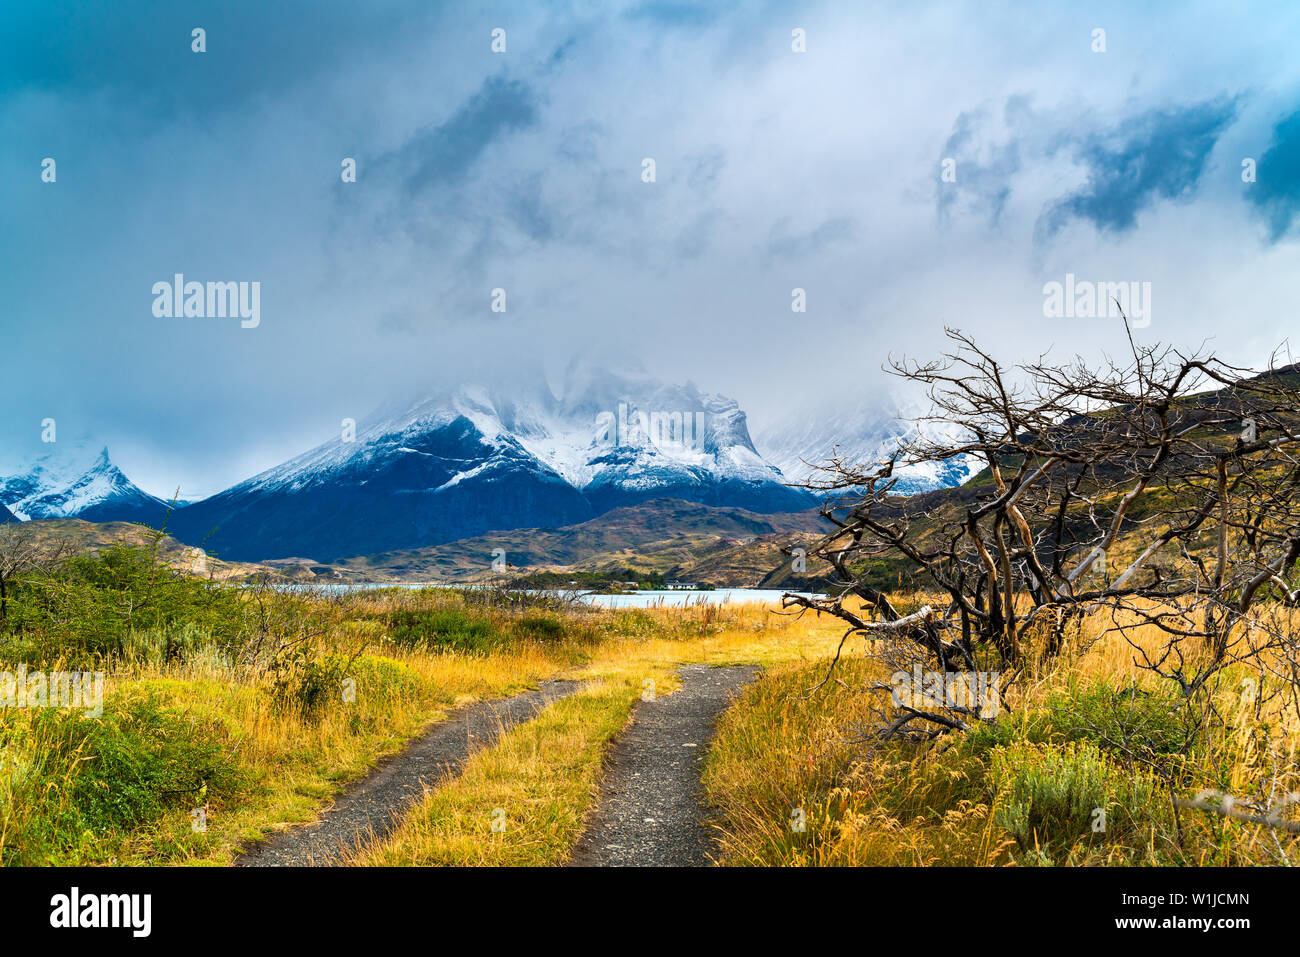 View of Cuernos Del Paine mountain with fog and rain clouds at Lake Pehoe in Torres del Paine National Park, Chile Stock Photo